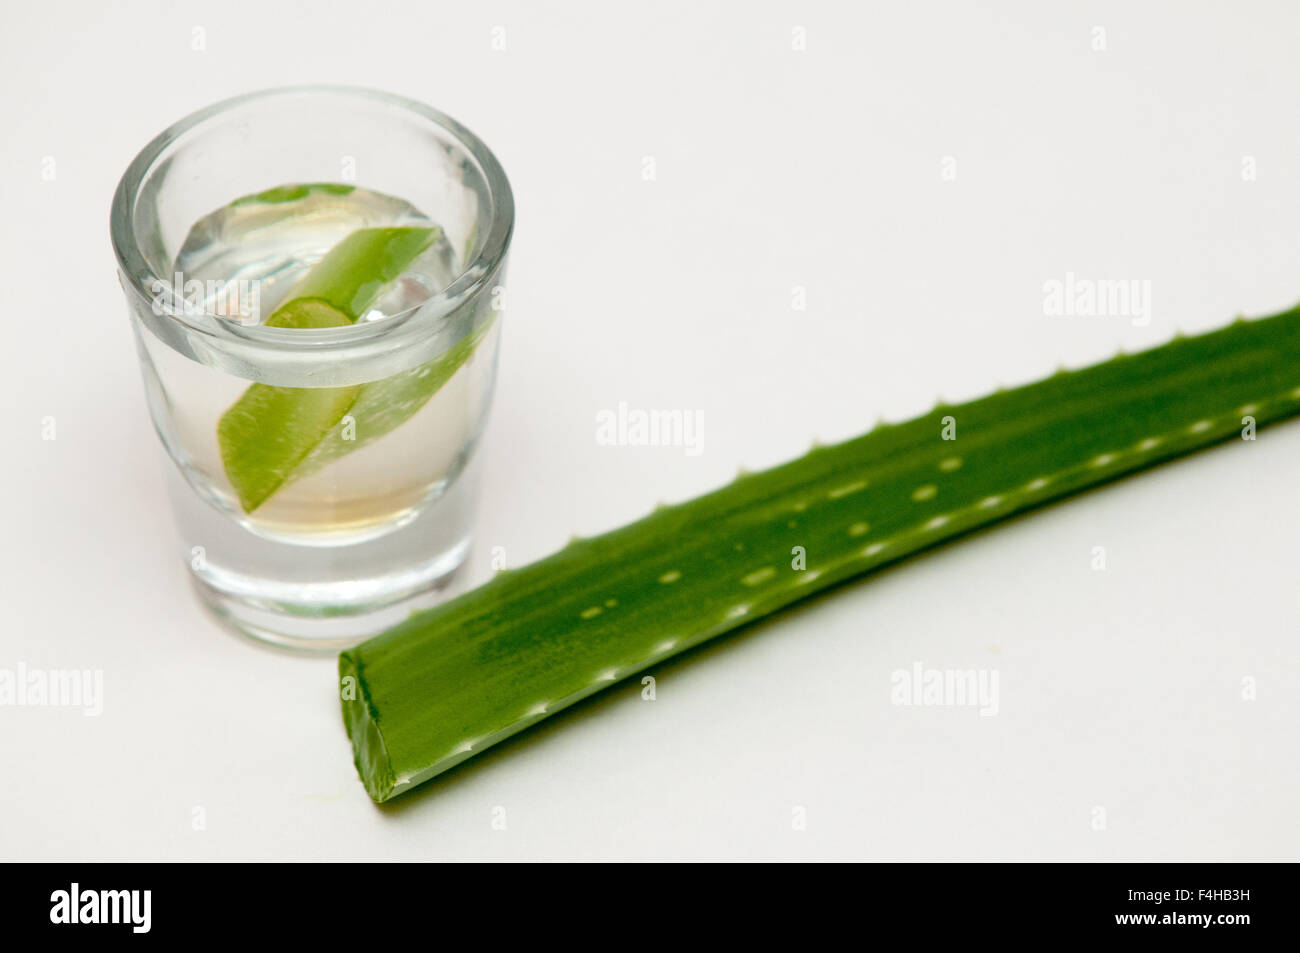 Aloe vera plant being prepared to make a drink Stock Photo